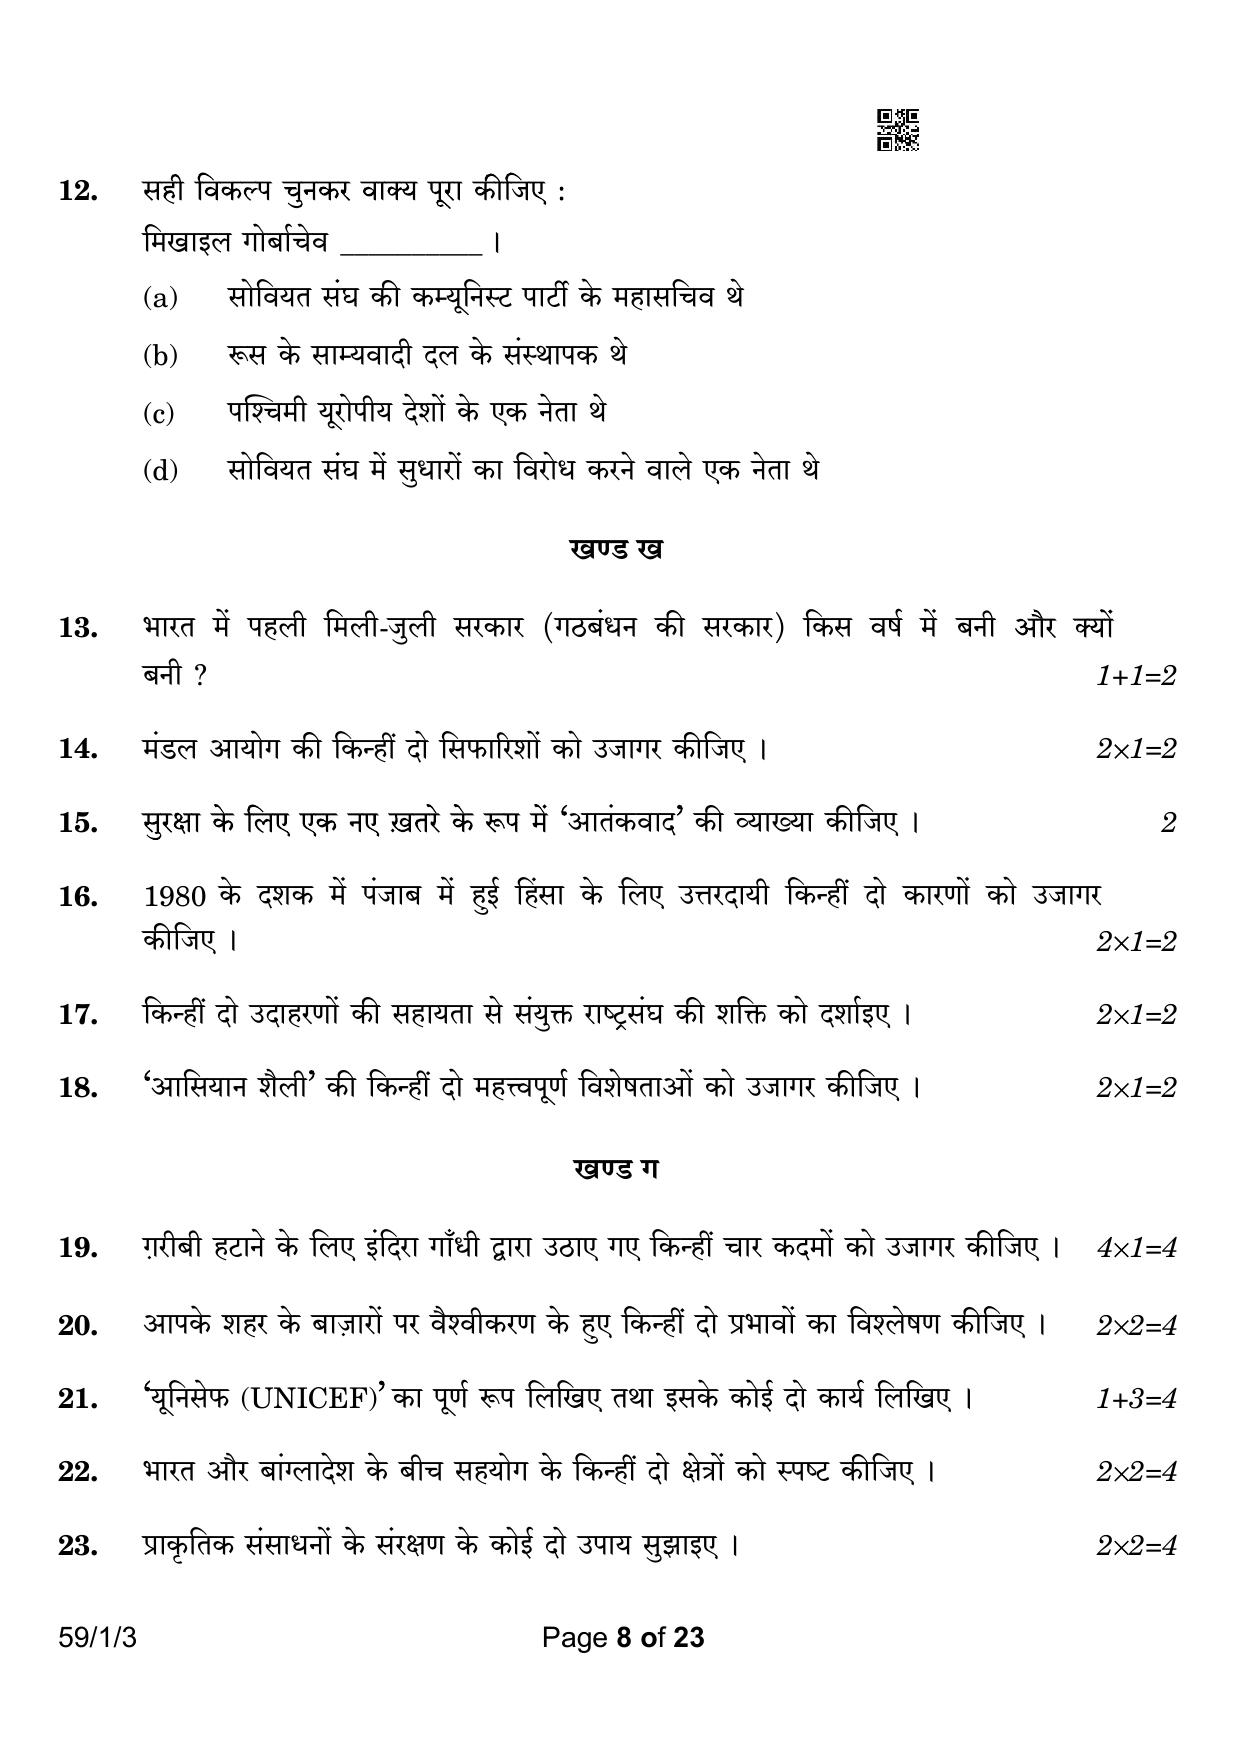 CBSE Class 12 59-1-3 Political Science 2023 Question Paper - Page 8